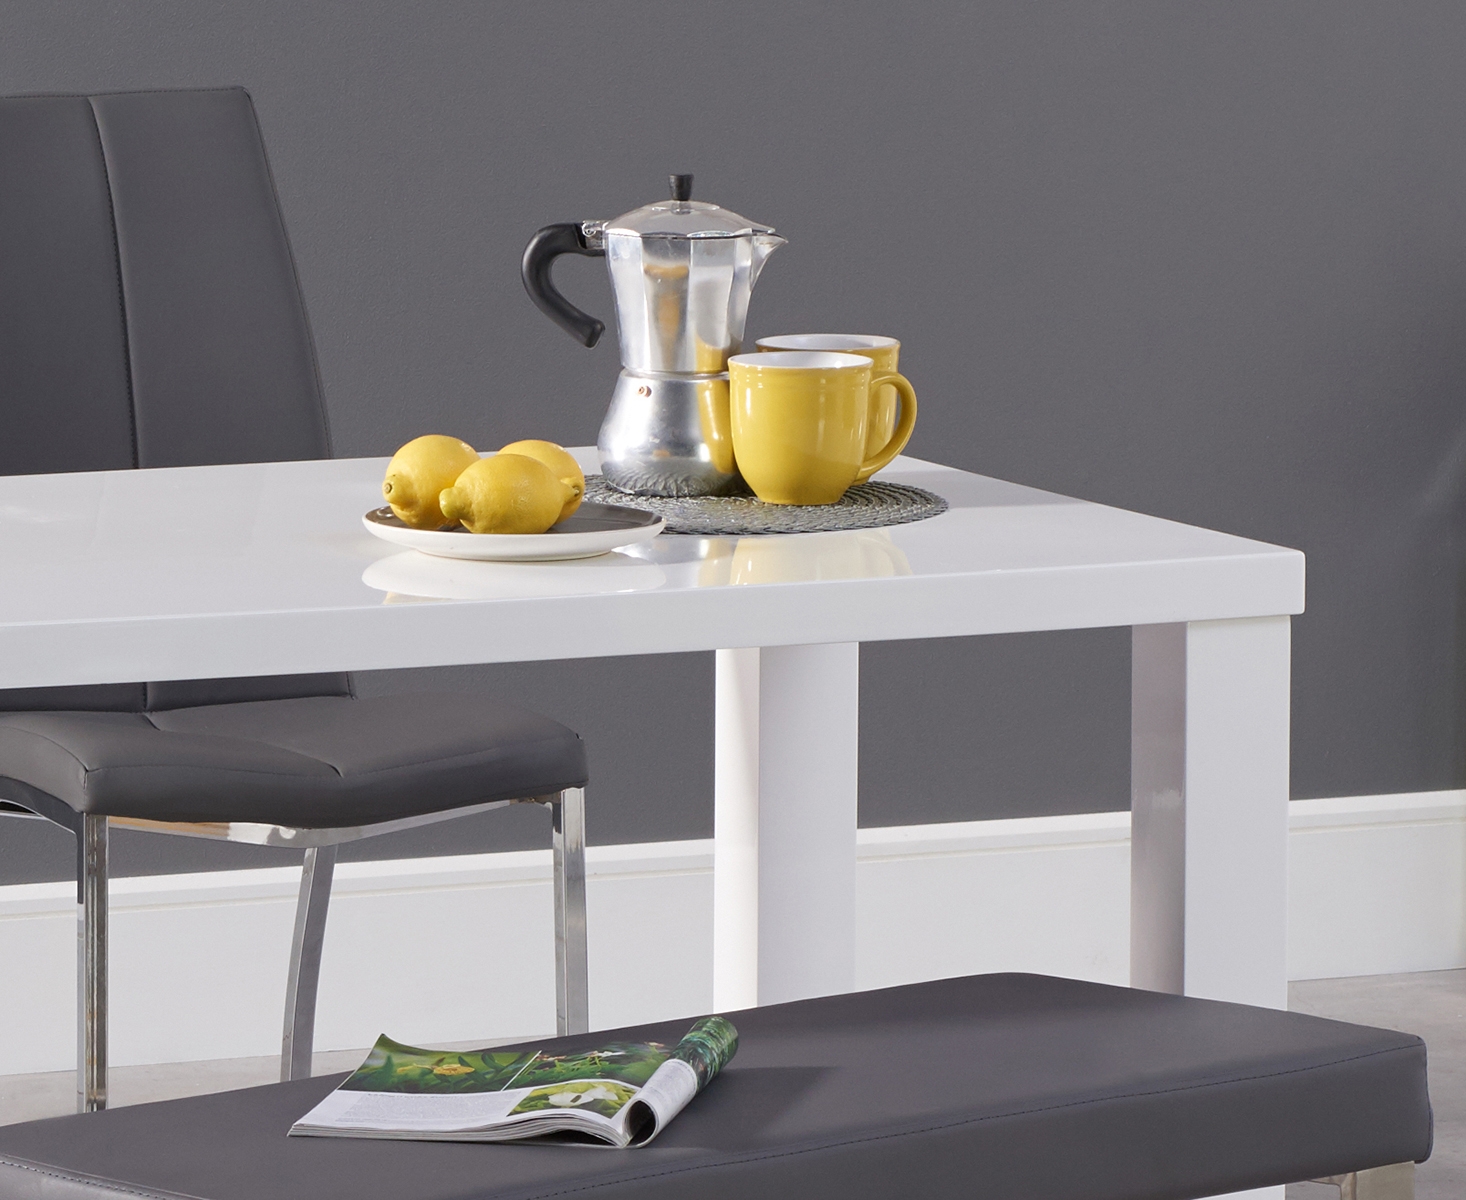 Photo 2 of Seattle 120cm white high gloss dining table with 4 grey marco chairs with 1 grey bench